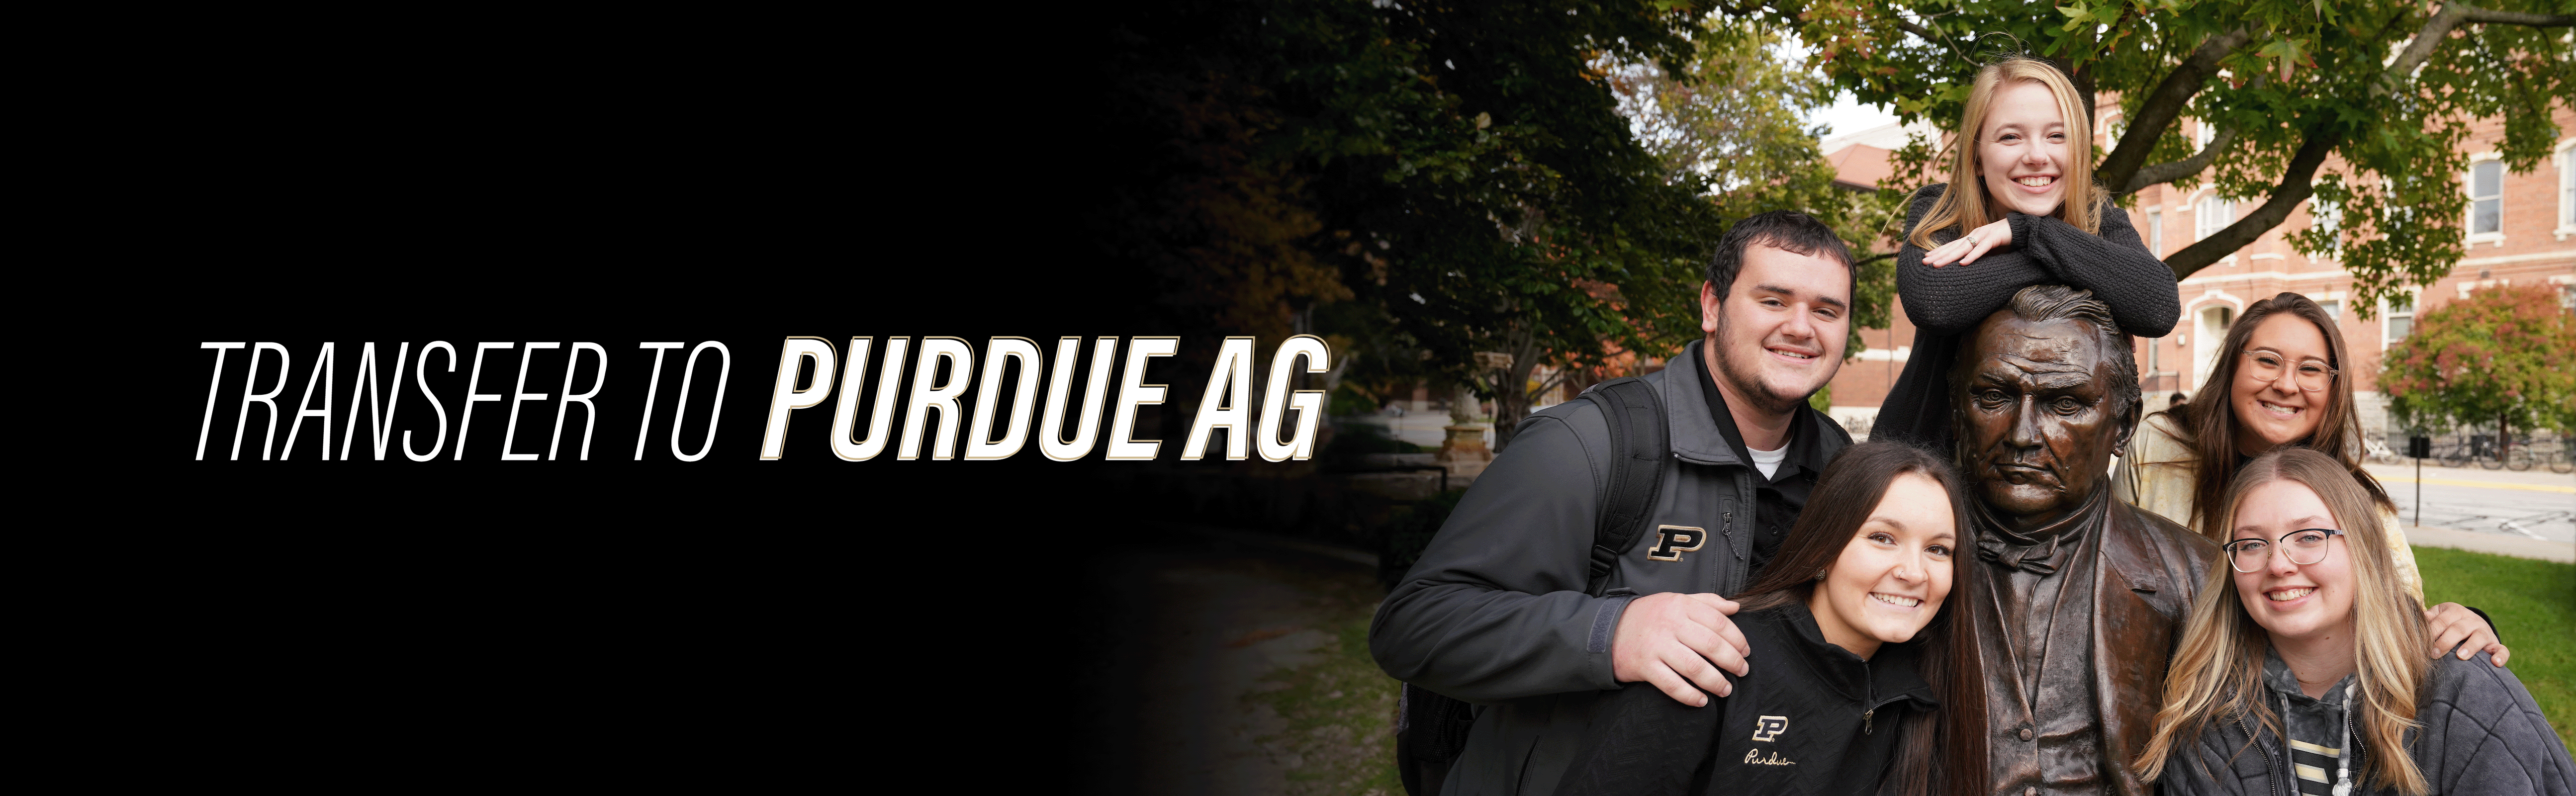 Transfer to Purdue Ag